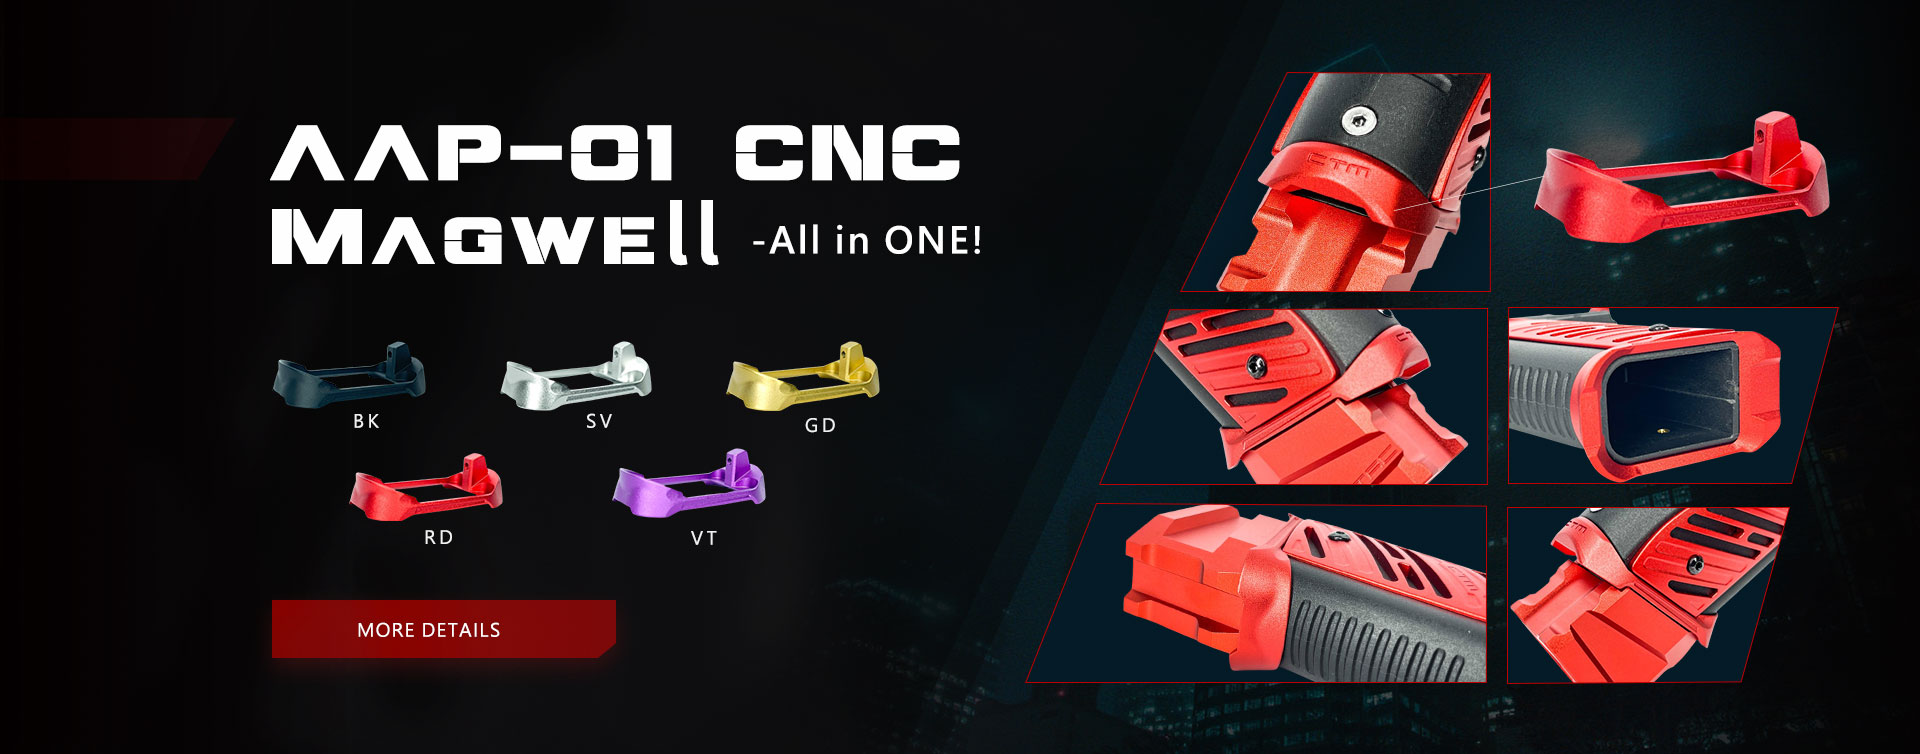 AAP-01/C CNC Magwell - All in one